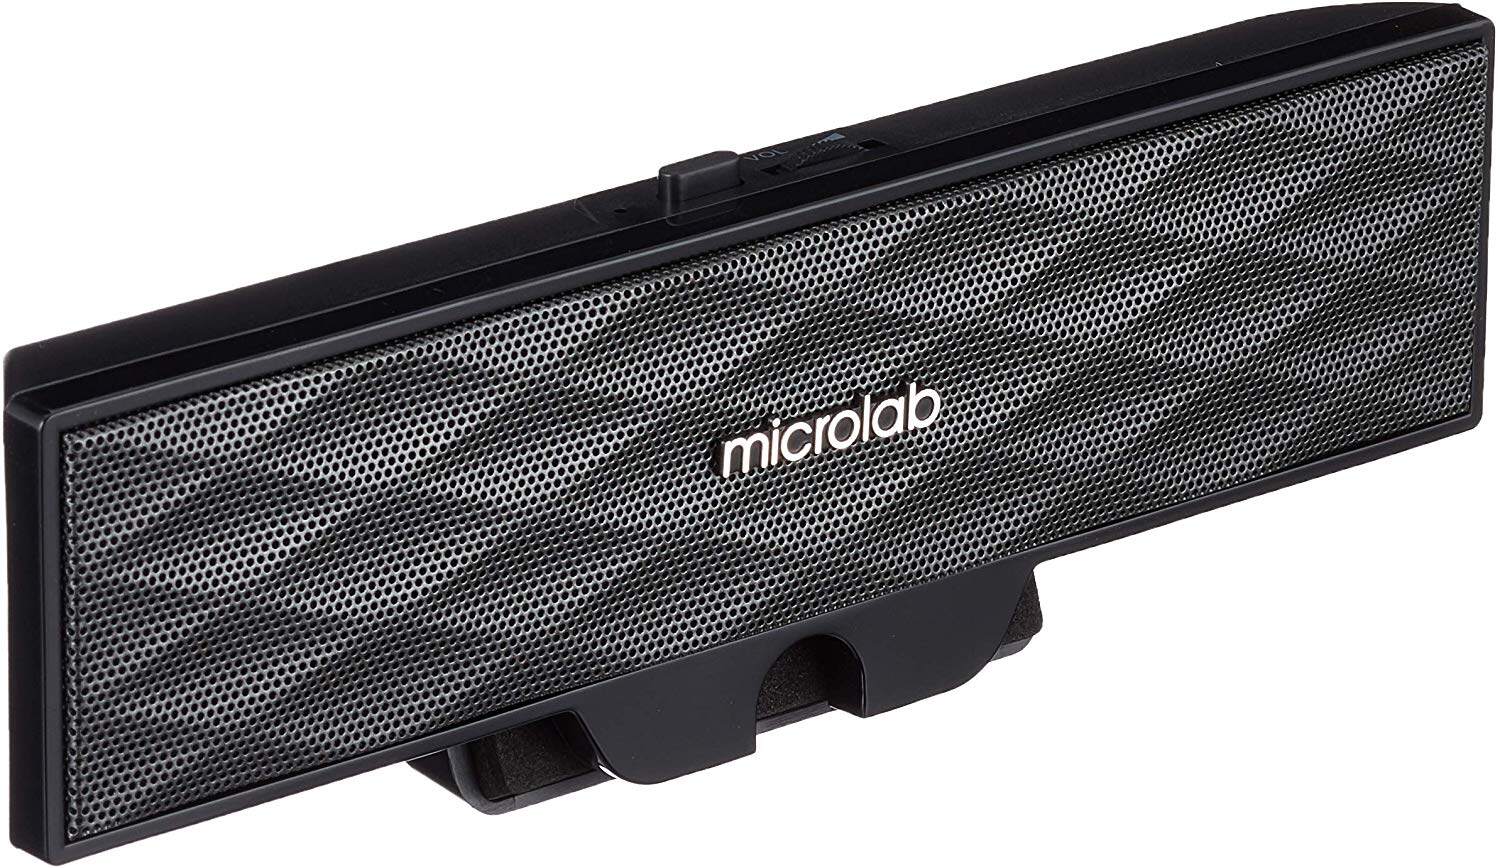 Microlab B51 Stereo 2.0 Speakers for Laptop and Notebook ใช้ไฟ USB Input: 3.5mm line in (Black)